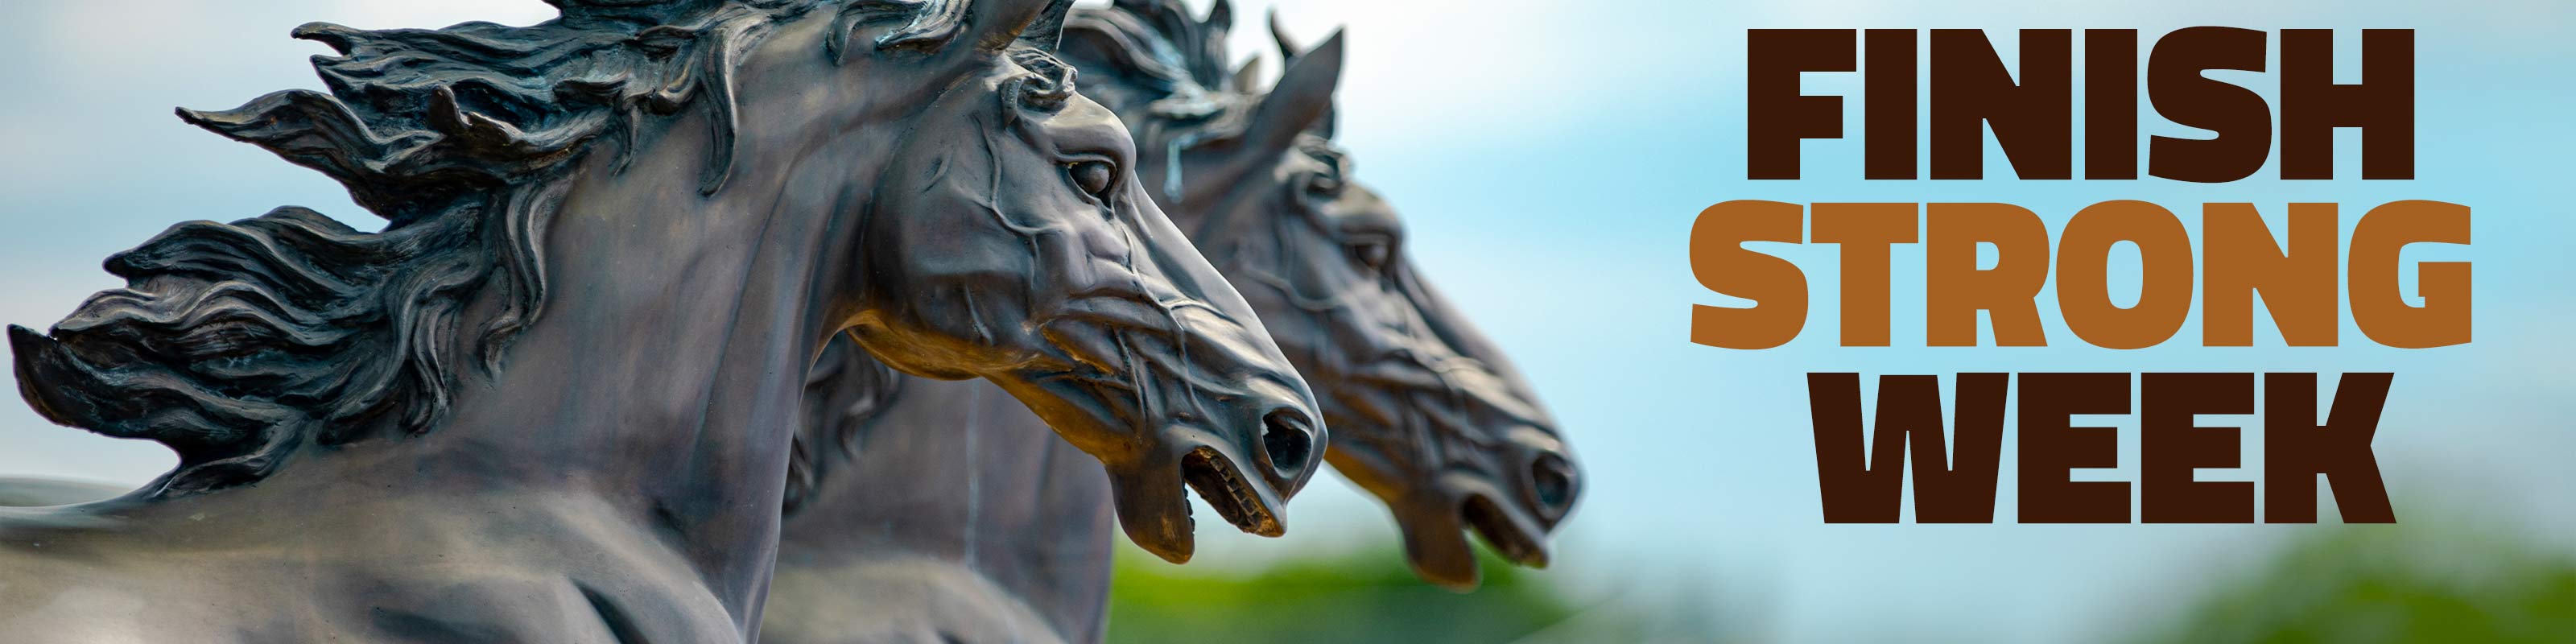 Mustang statues